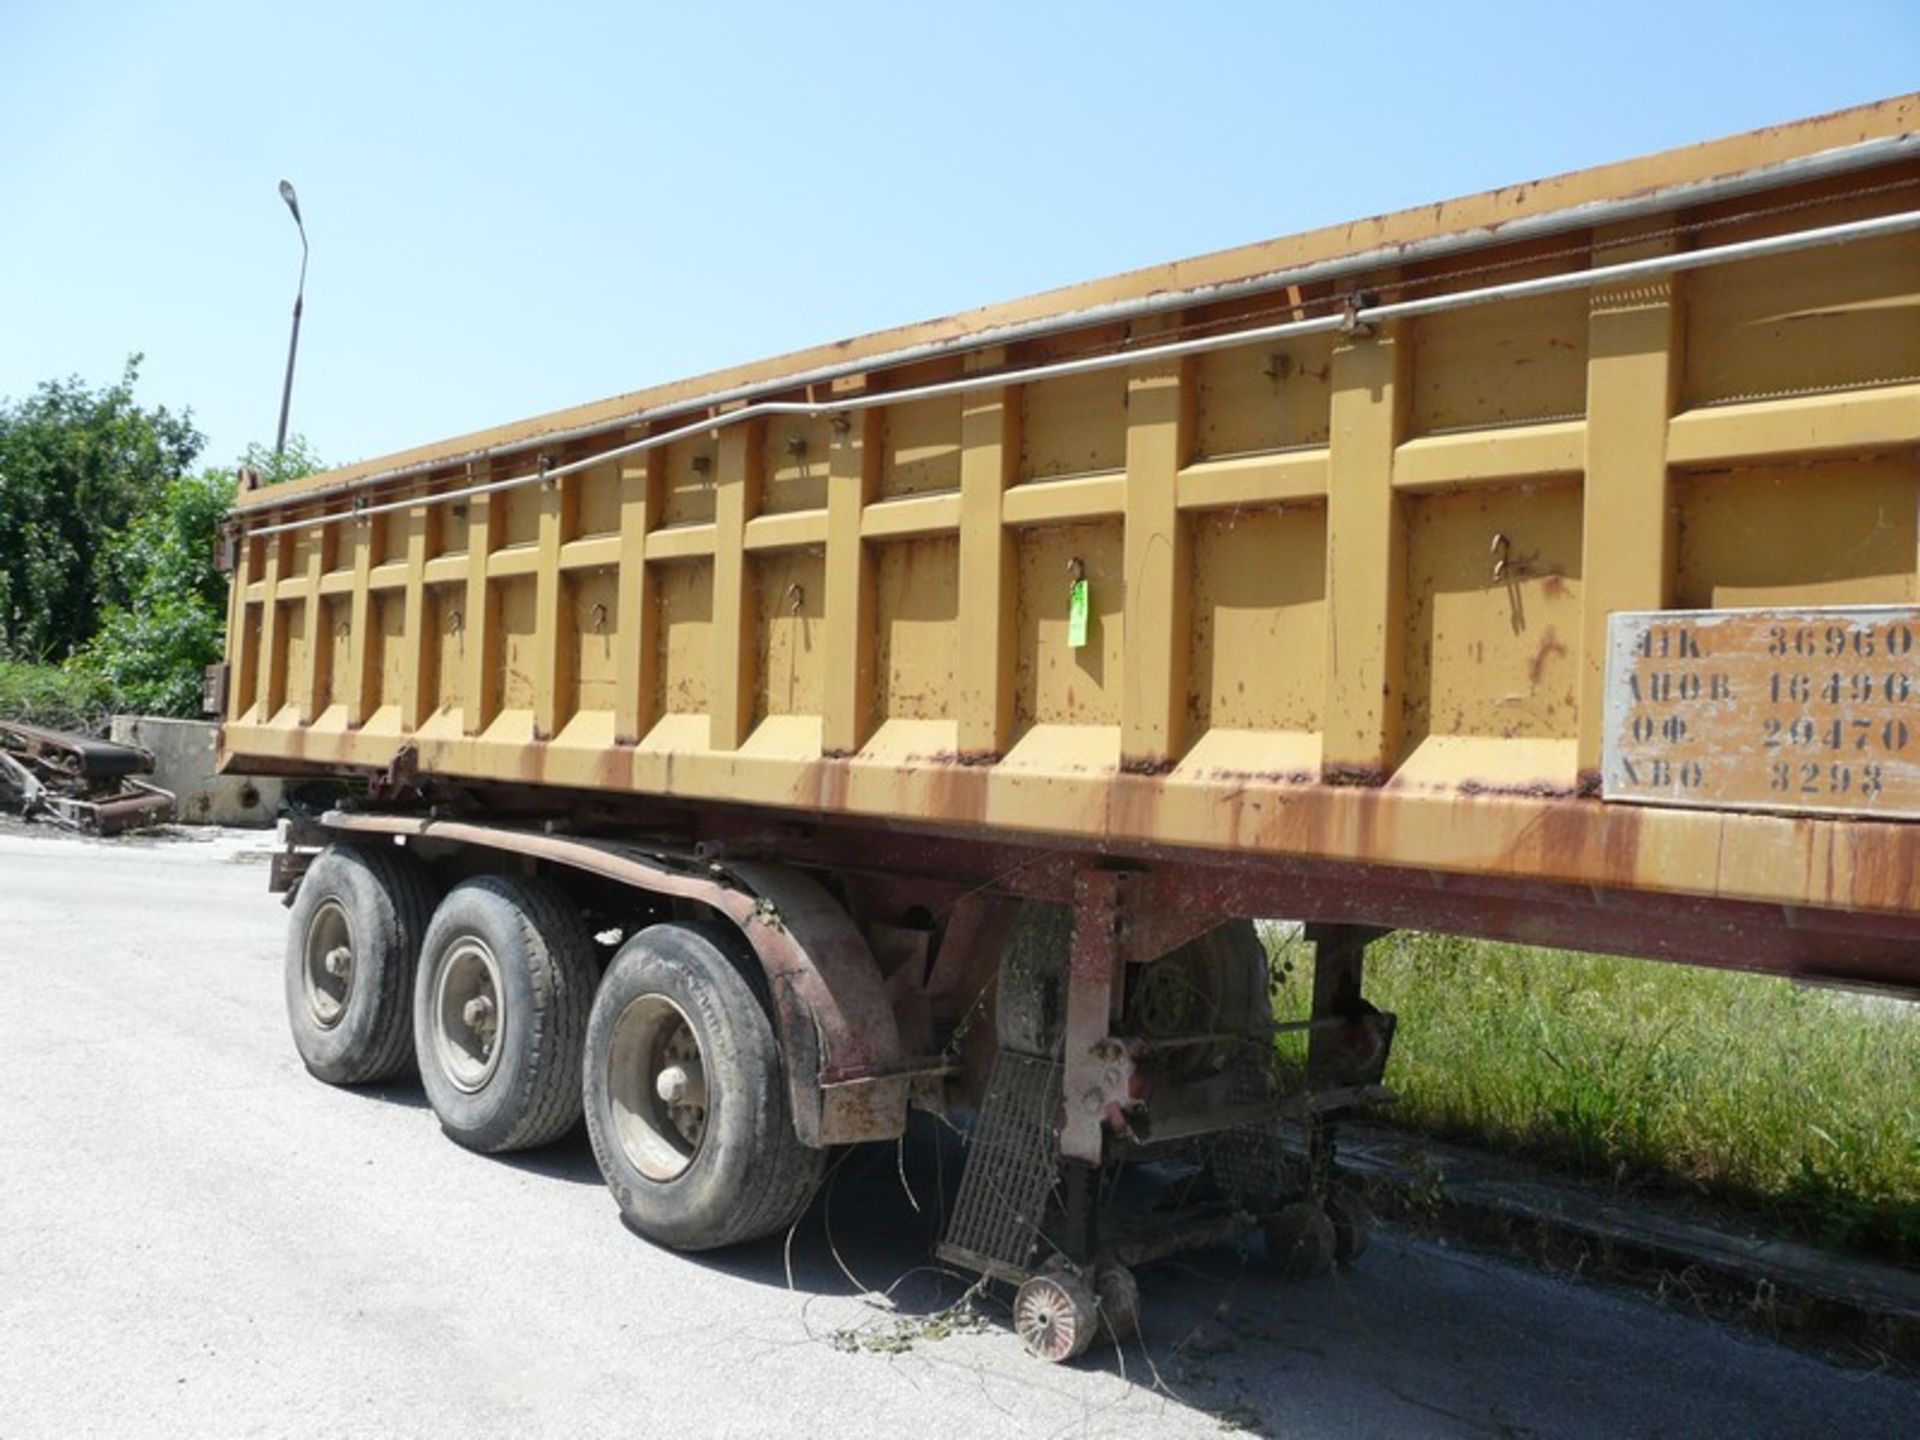 3 AXILE BACK LIFT FOR OFF LOADING GRAVEL WITH SYSTEM TO COVER BACK PART (Located in Greece - Plati - Image 3 of 5